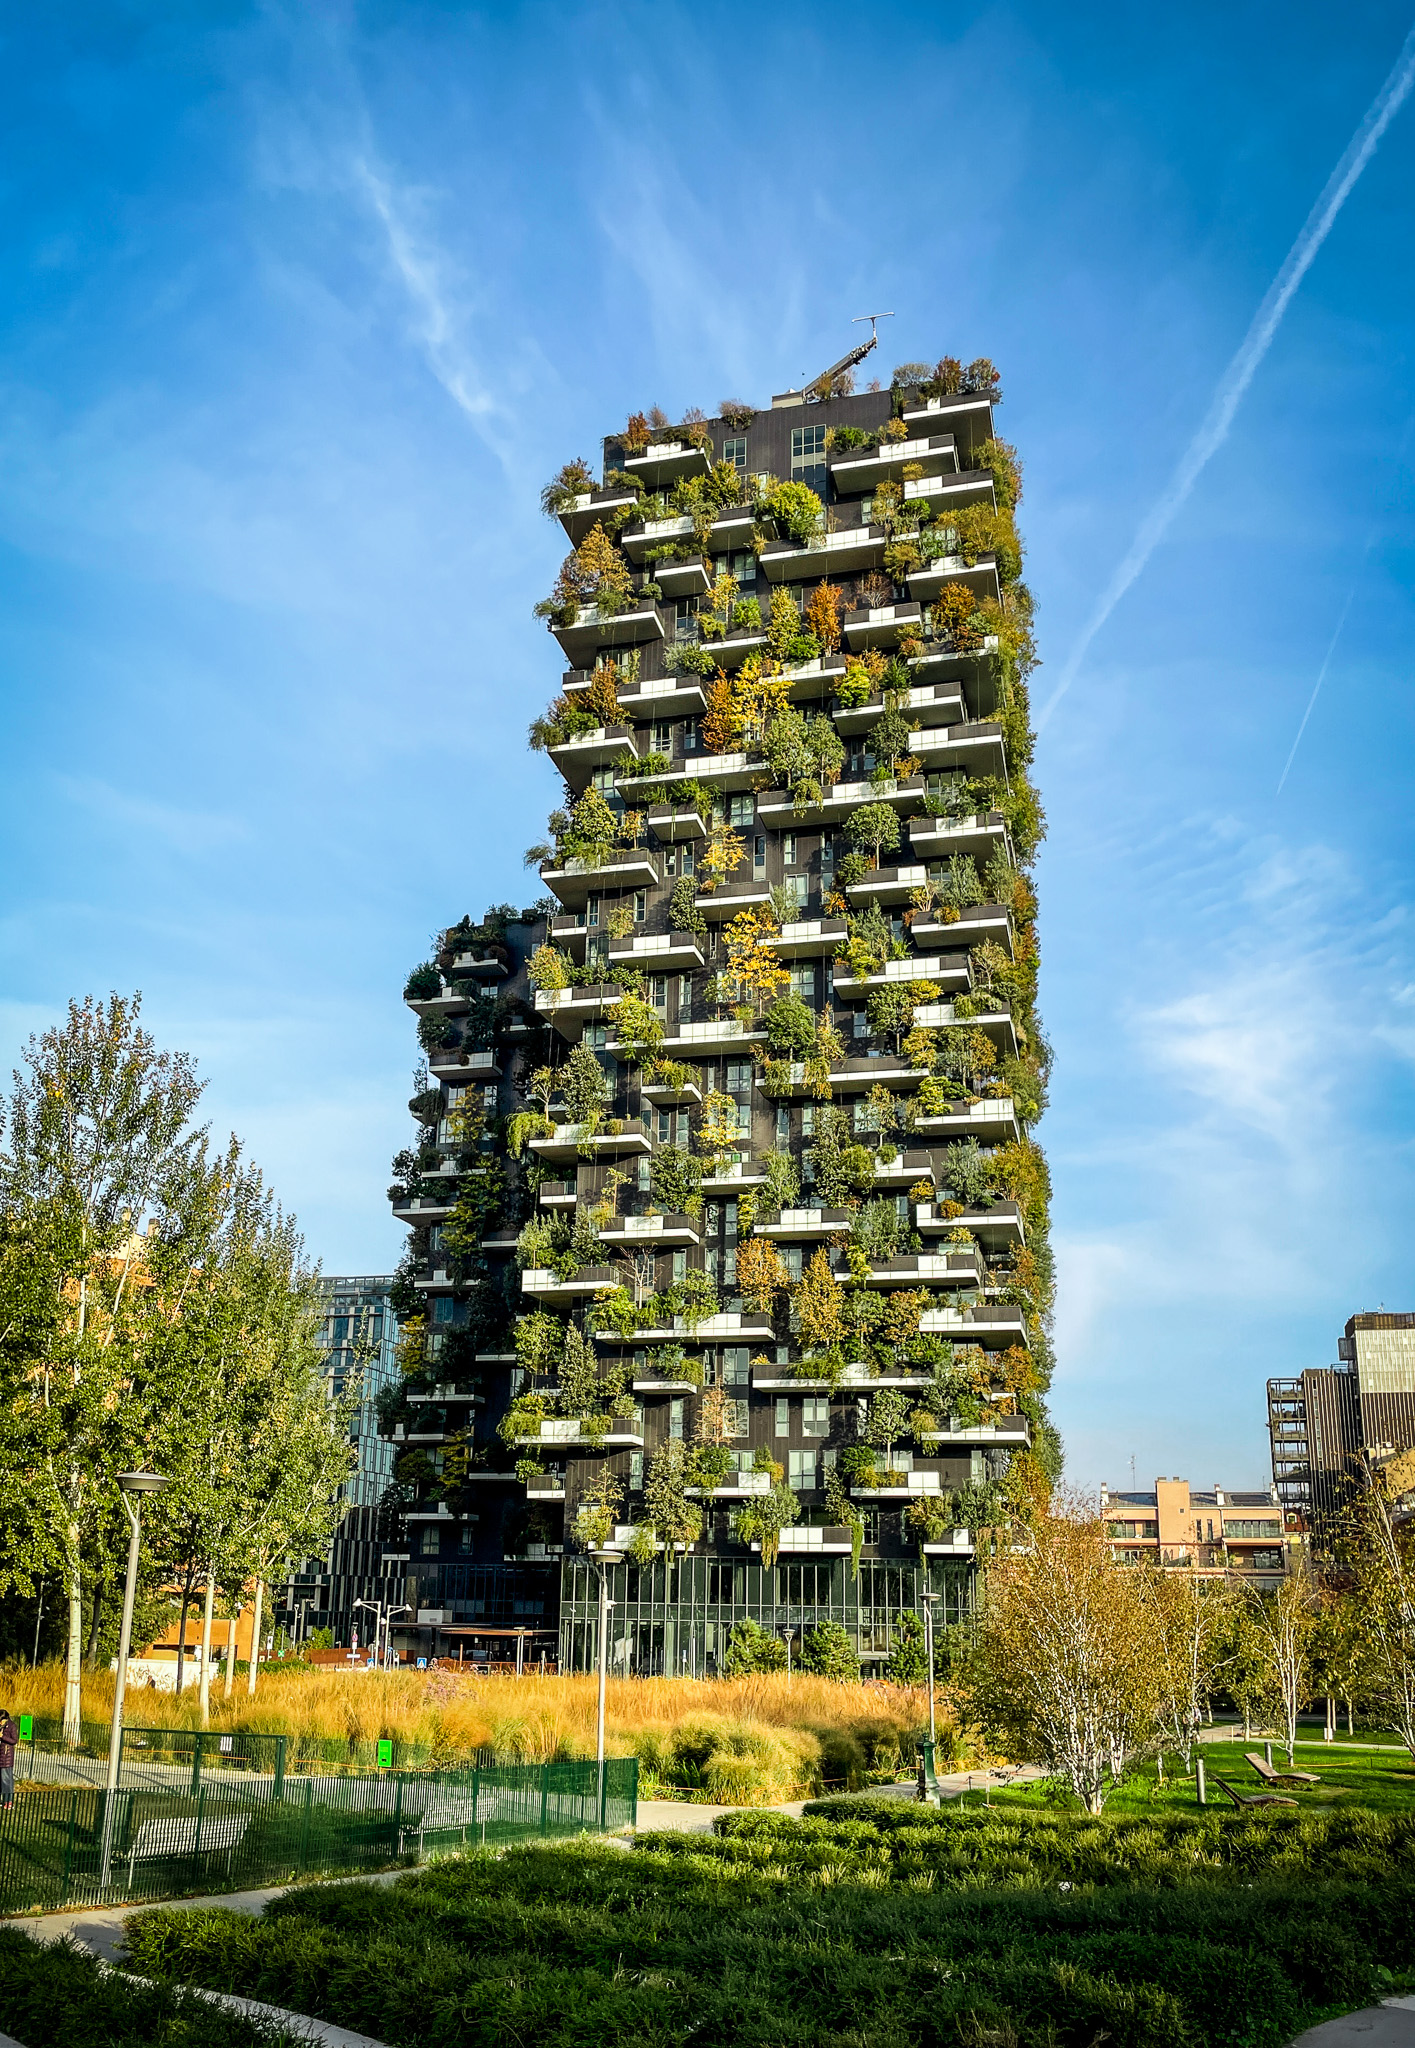 Bosco Verticale vertical forest apartment buildings Milan Italy